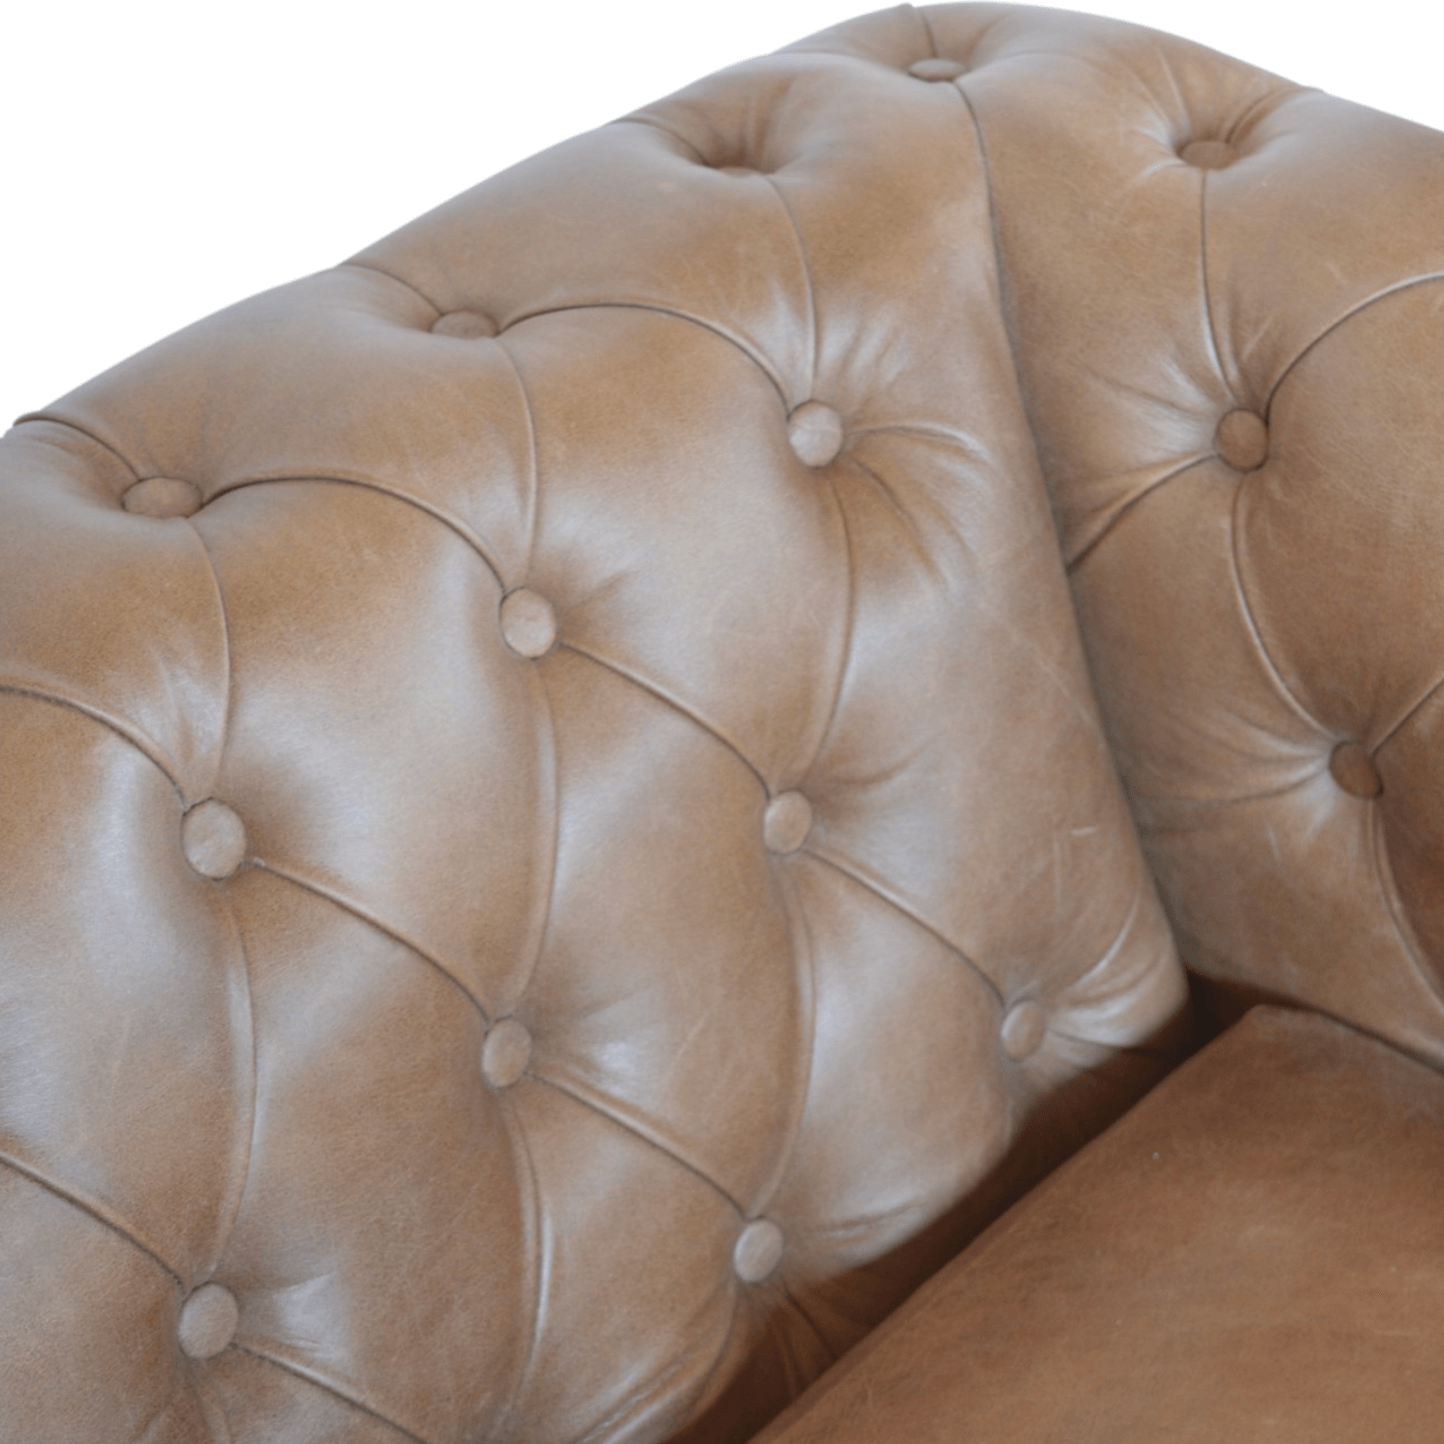 Button Tufted Rolled Arm Genuine Buffalo Leather Chesterfield Sofa Loveseat 59" - Revel Sofa 